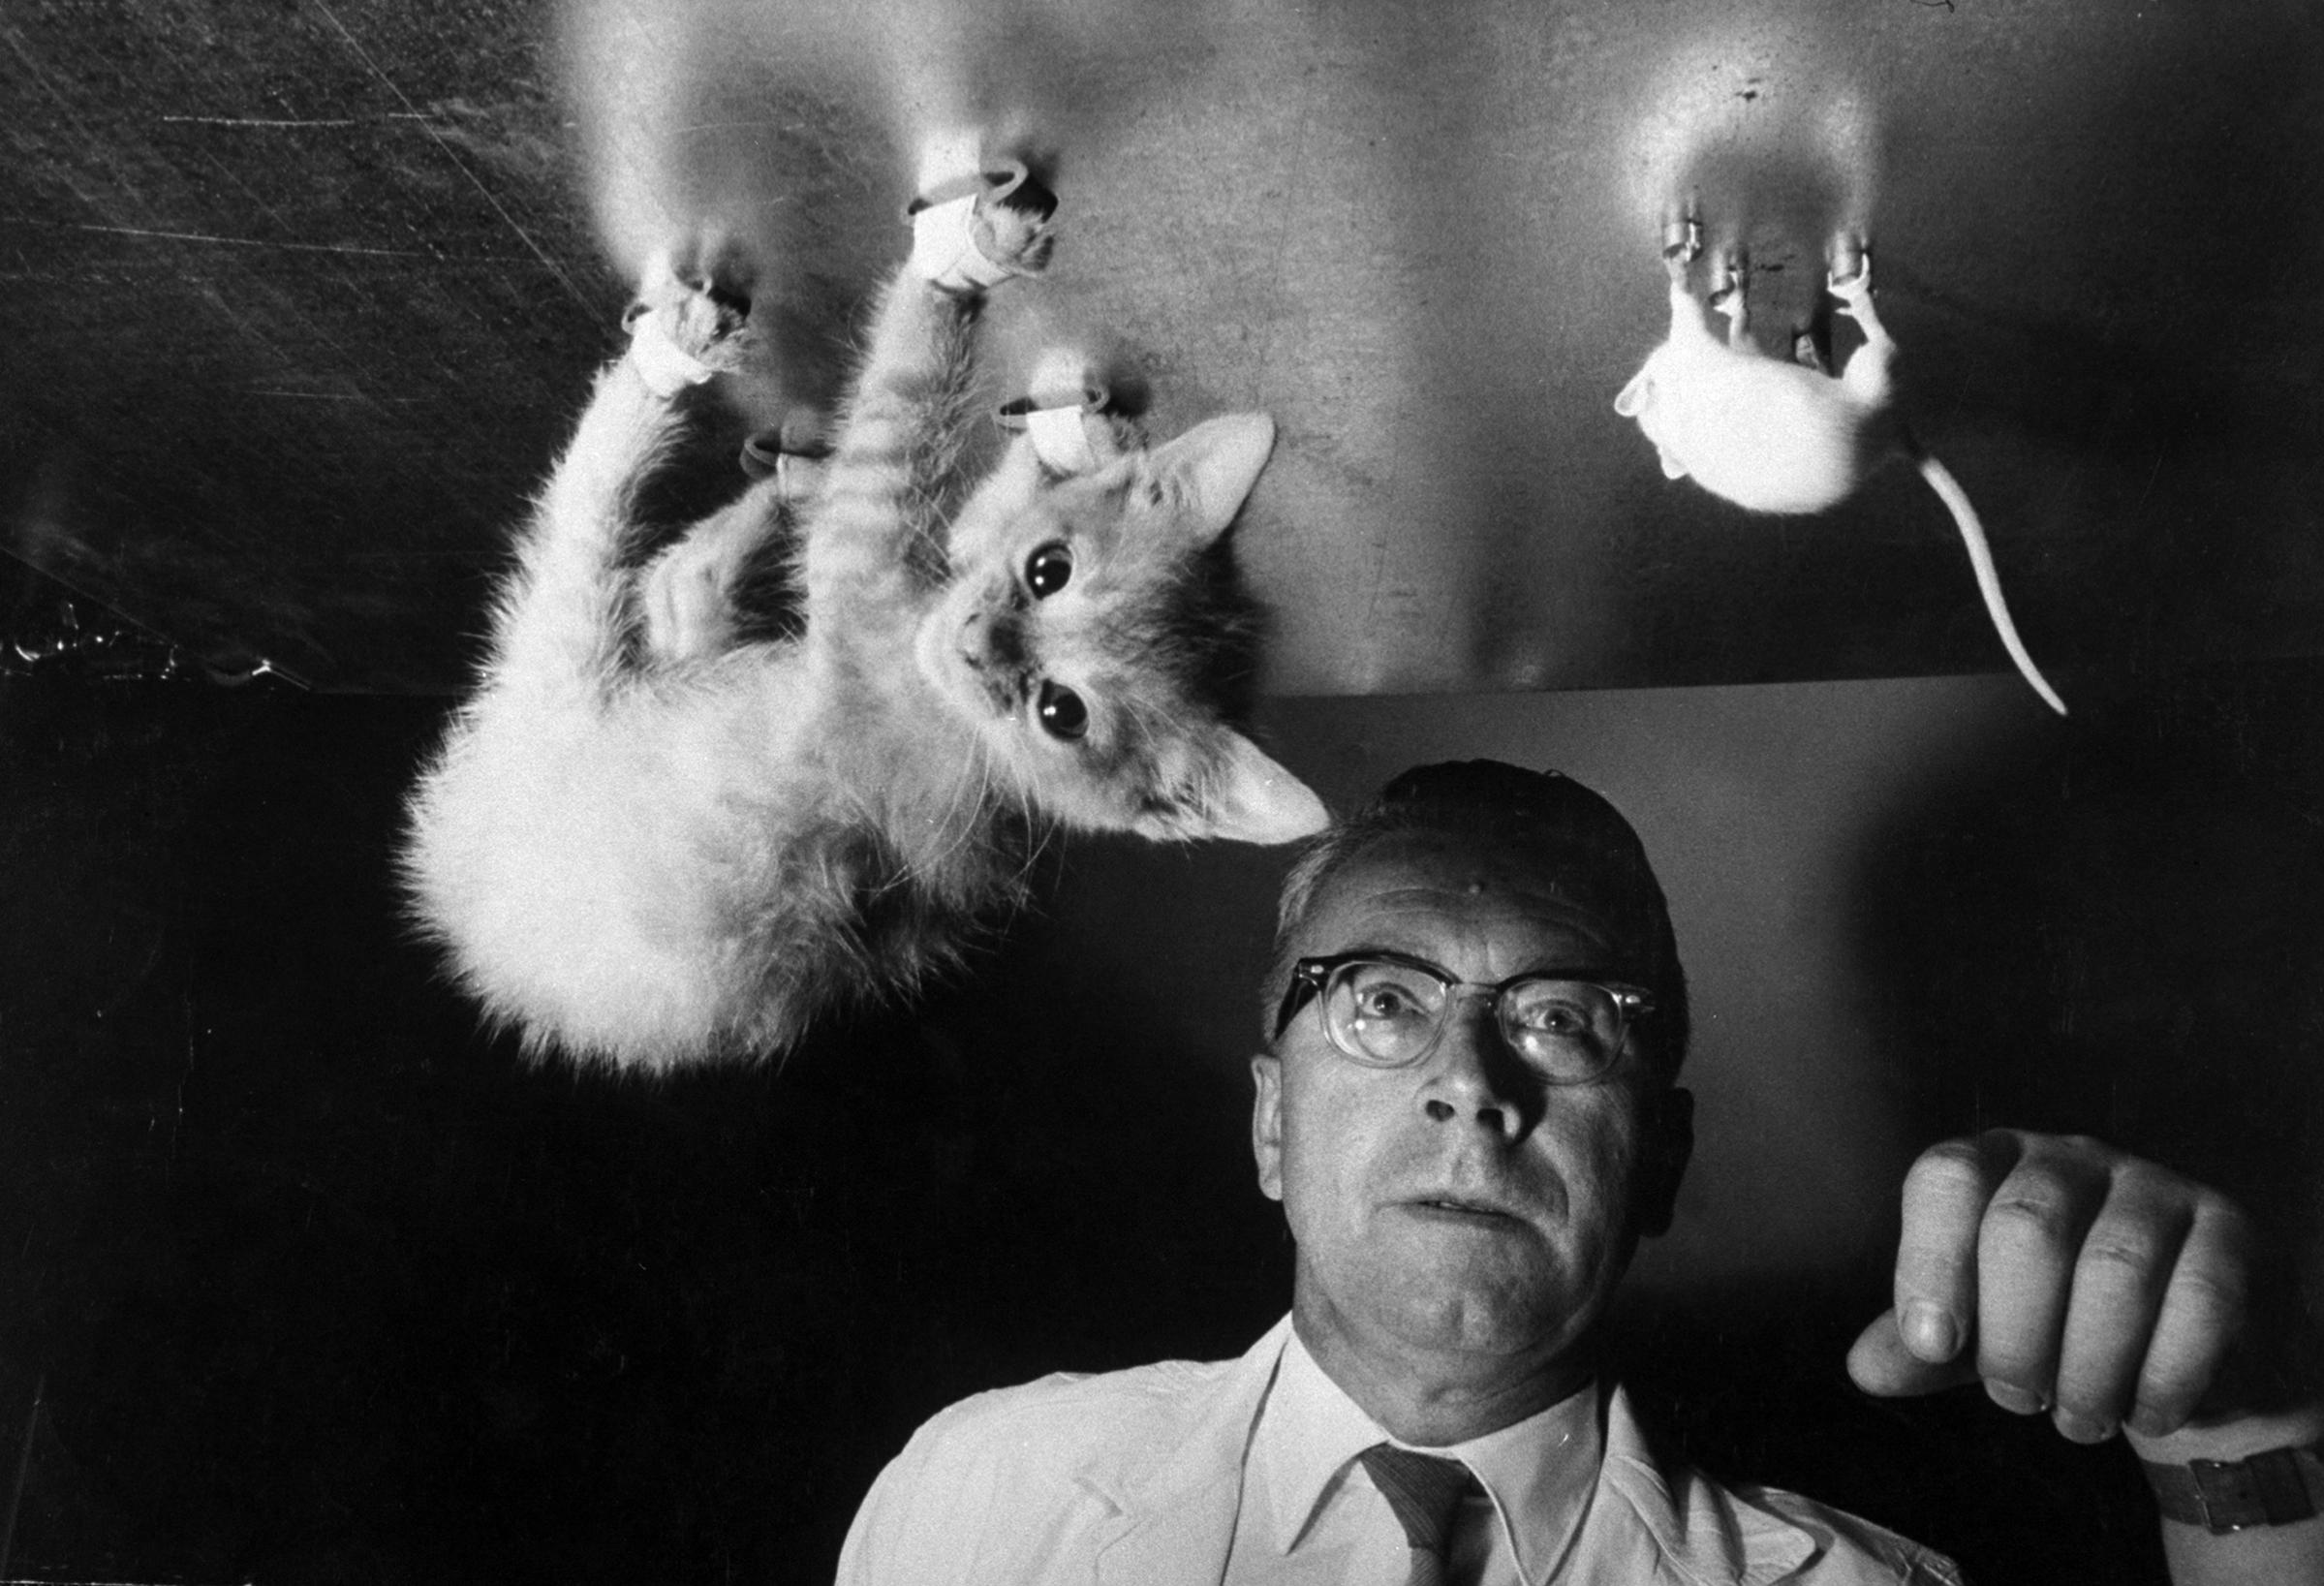 Naval researcher Dr. Dietrich Beischer testing effects of being upside-down for prolonged periods of time on a cat and mouse, 1958.